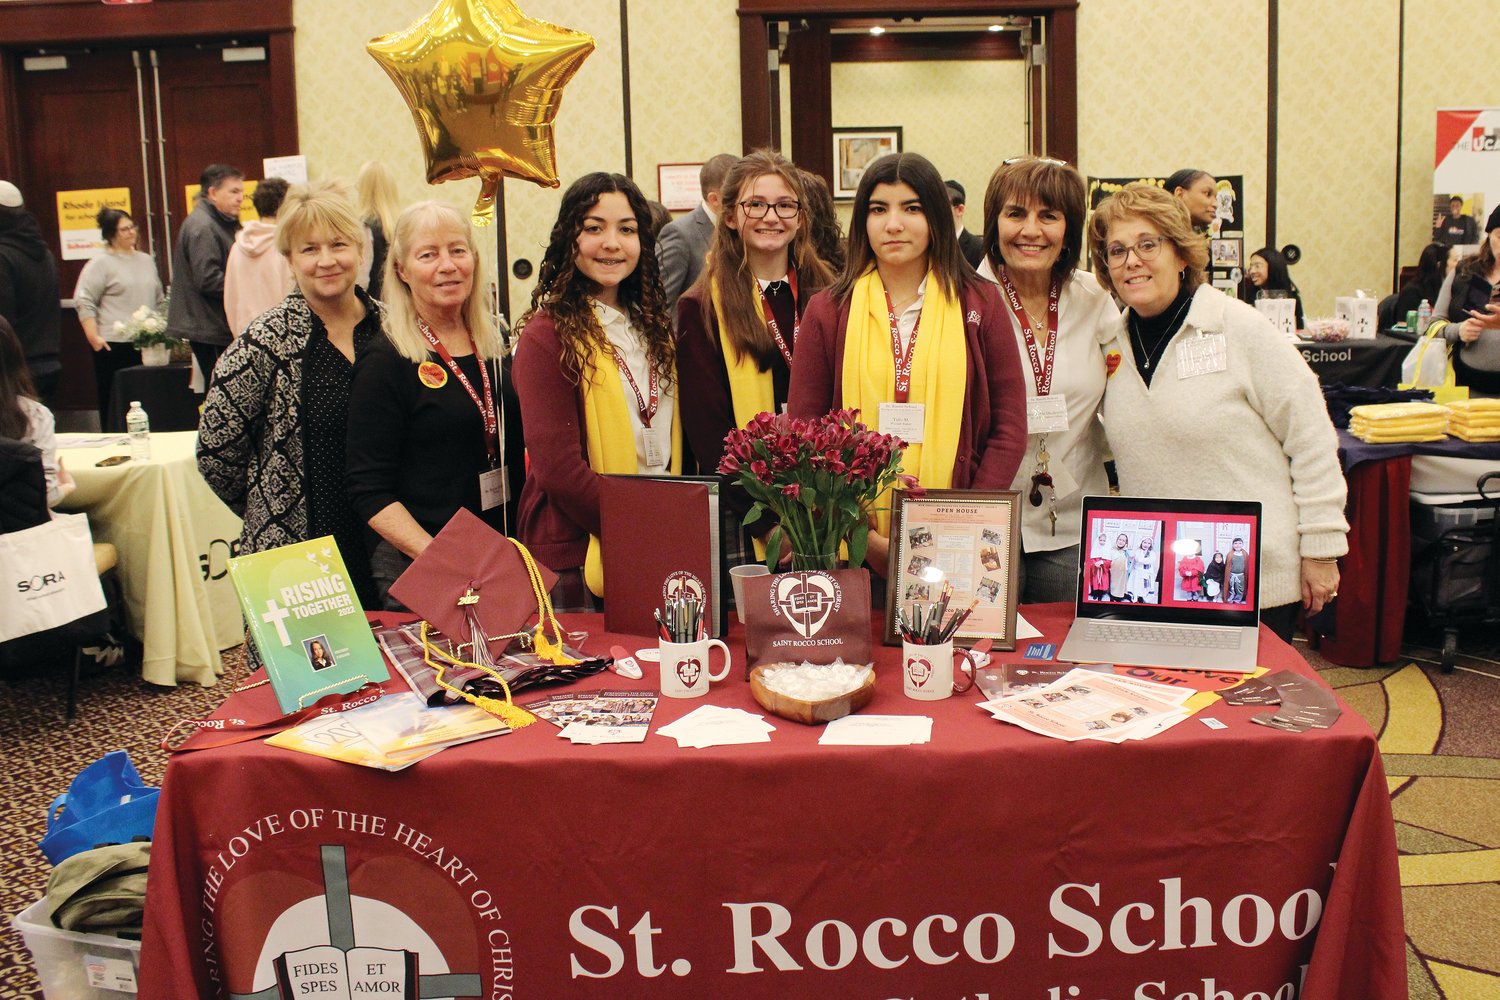 Many Catholic schools from around the state had a presence at the event, including St. Rocco School in Johnston, pictured.